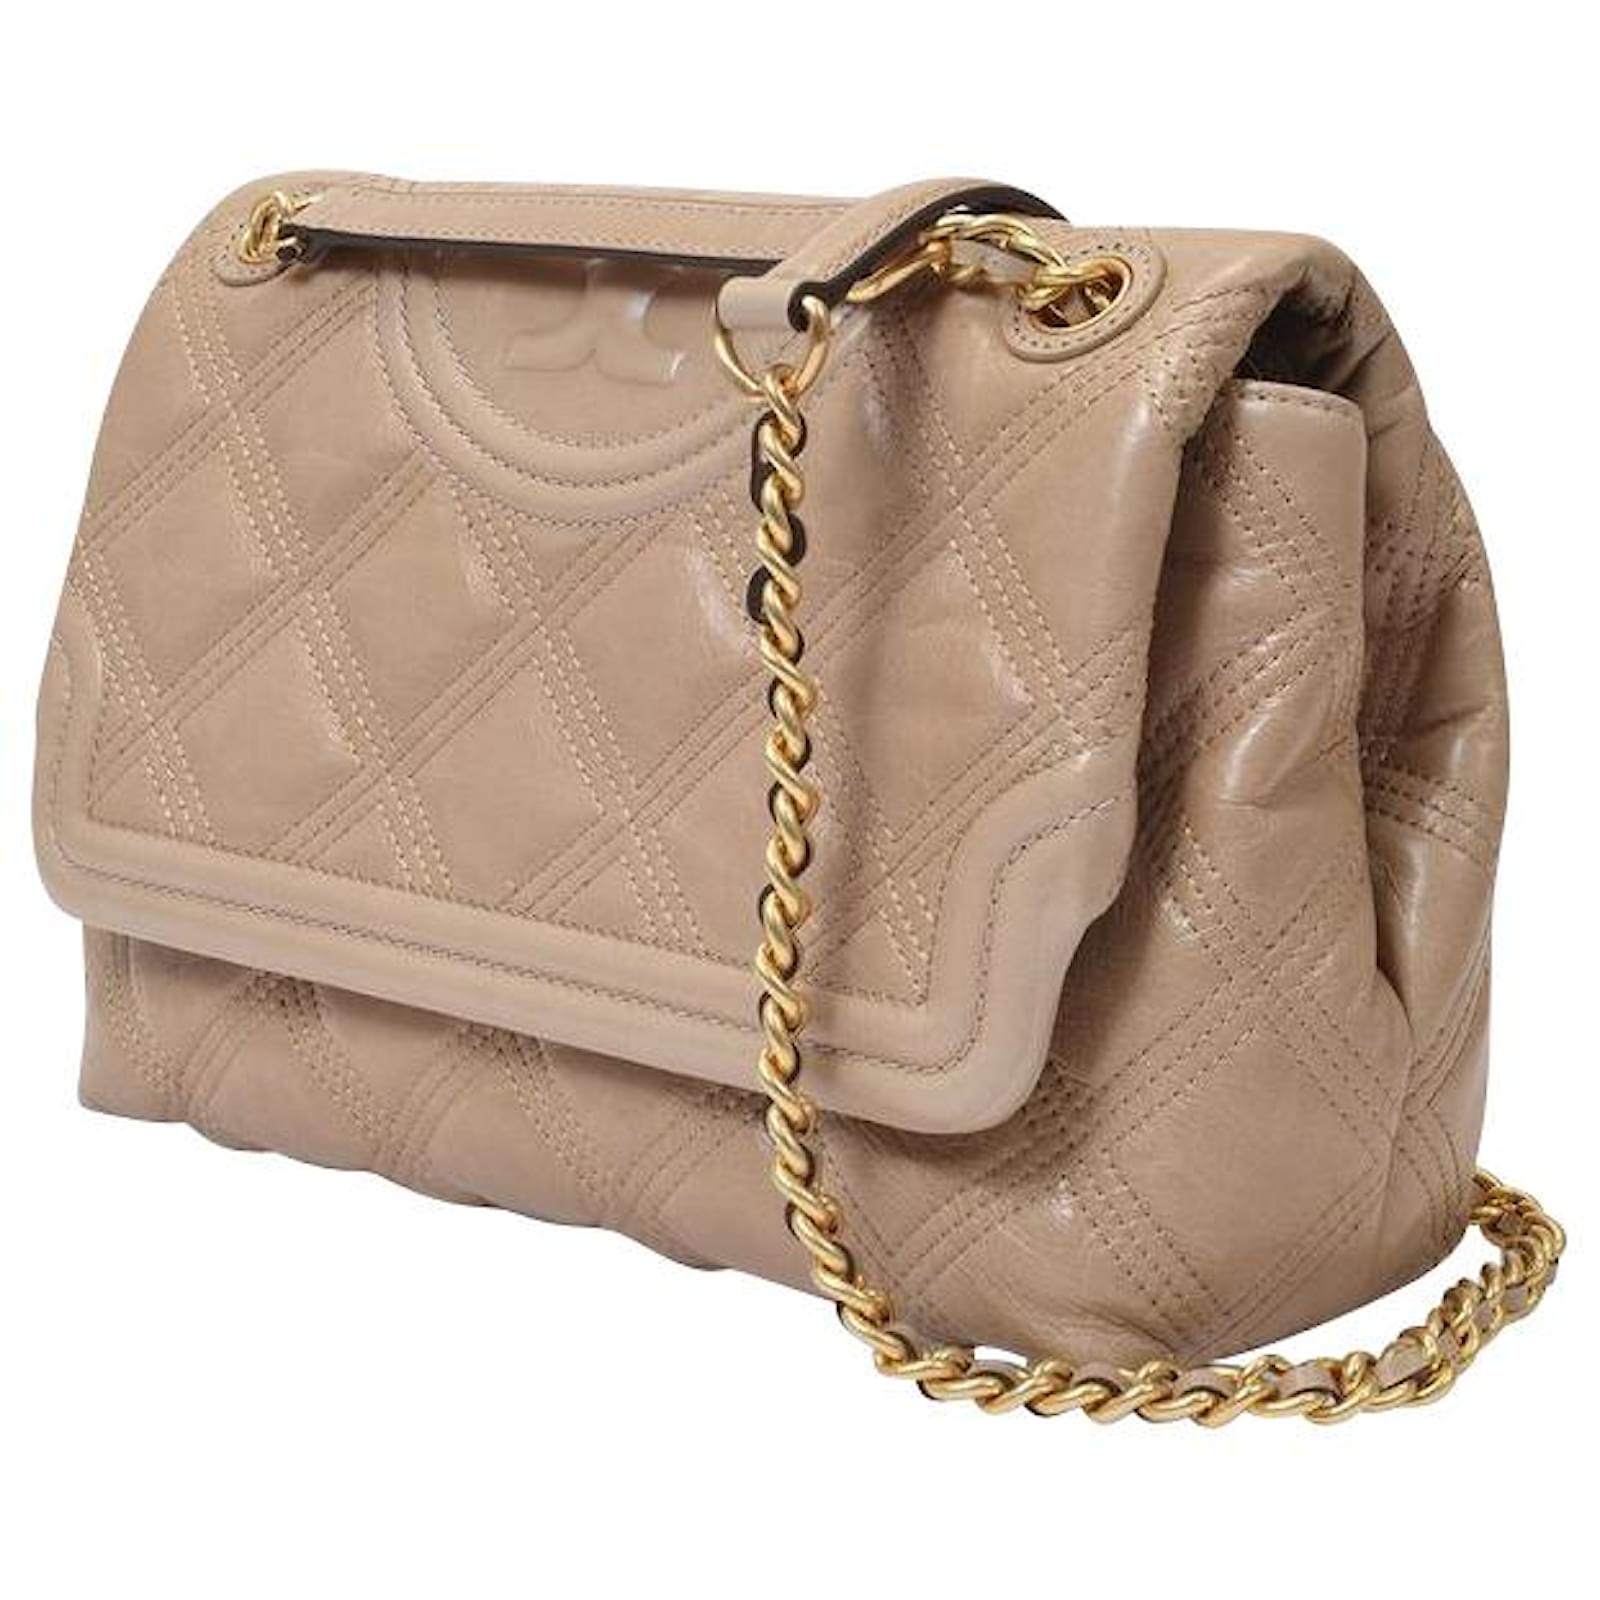 Tory Burch Flemming Soft Glazed Small Convertible Bag in Beige